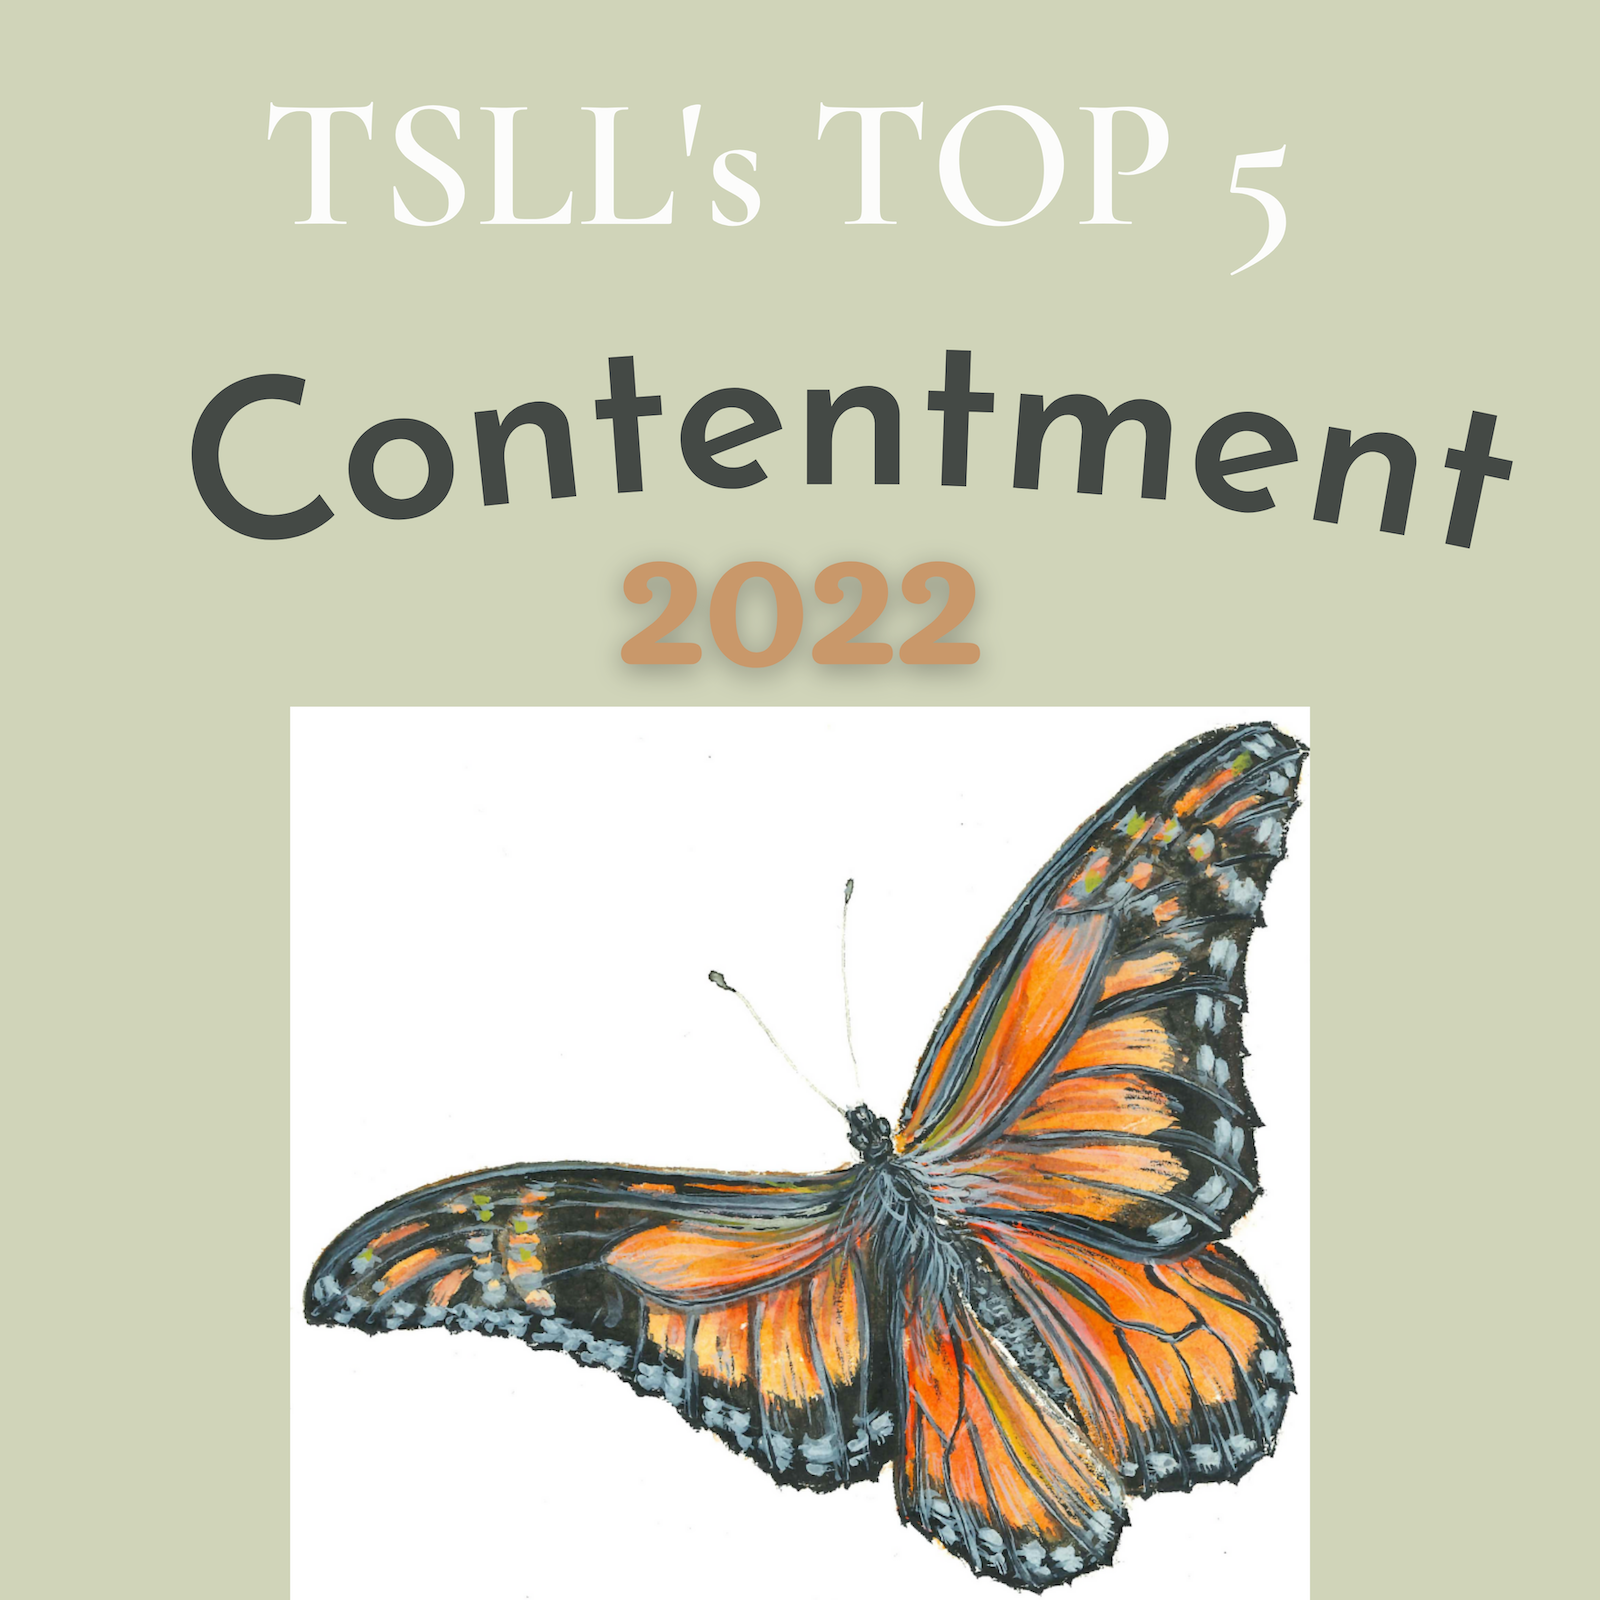 The TOP 5 Contentment posts, 2022